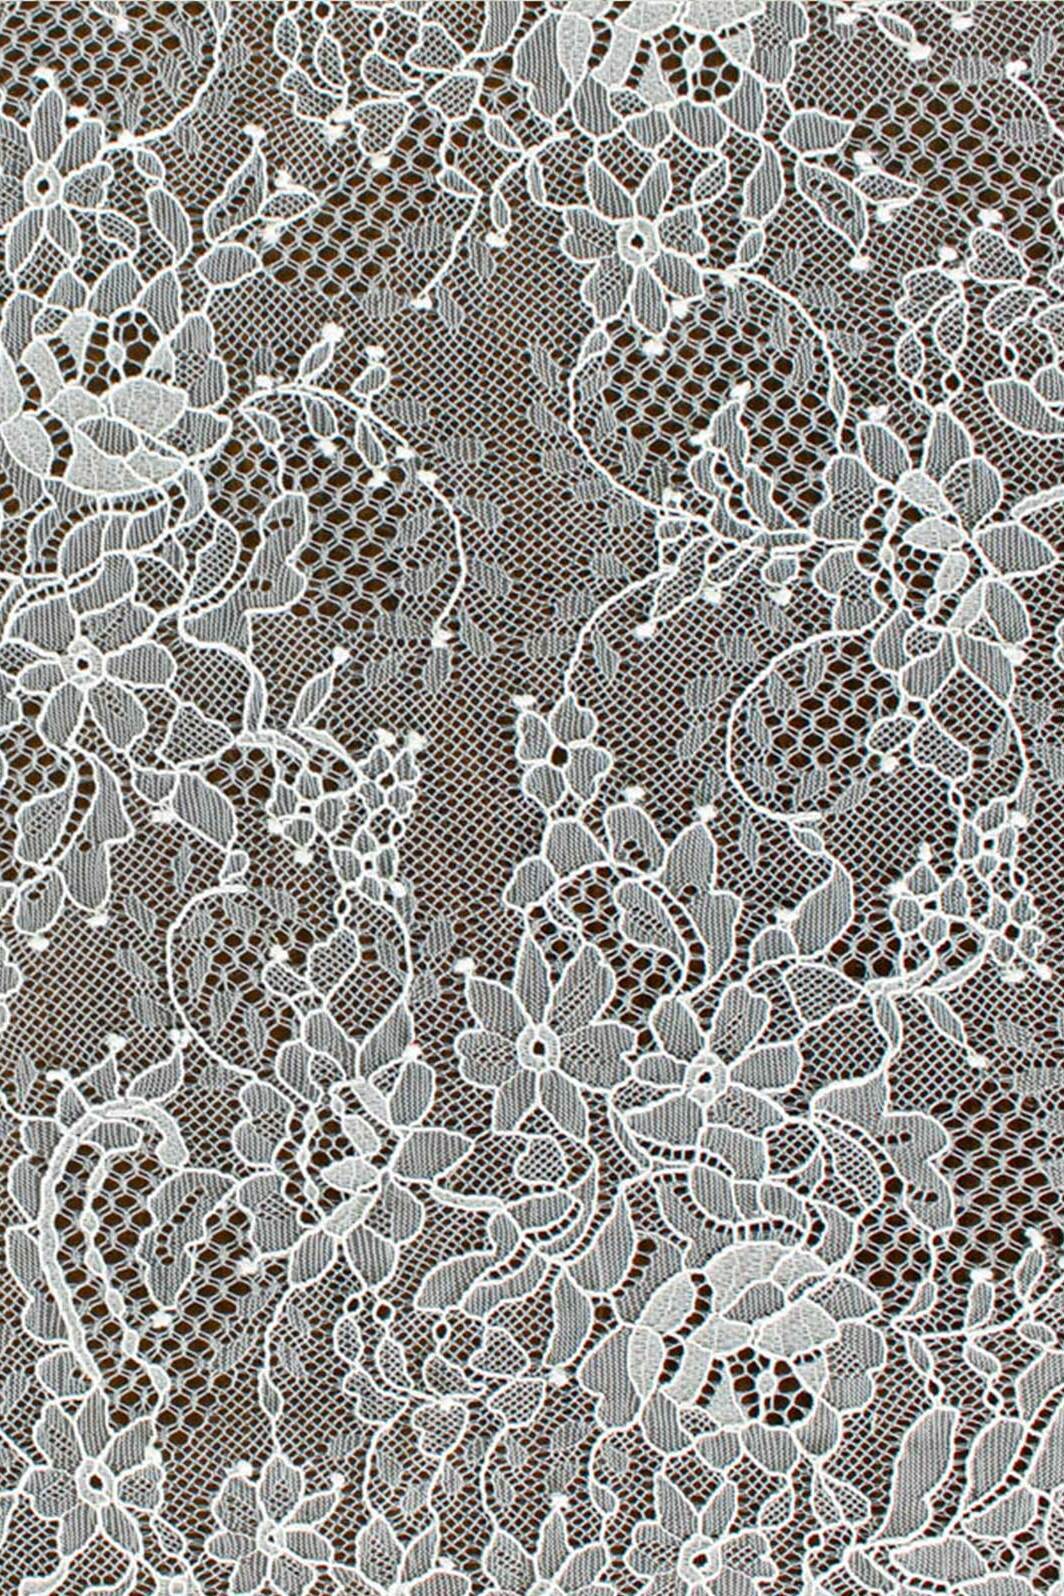 Chantilly Lace White